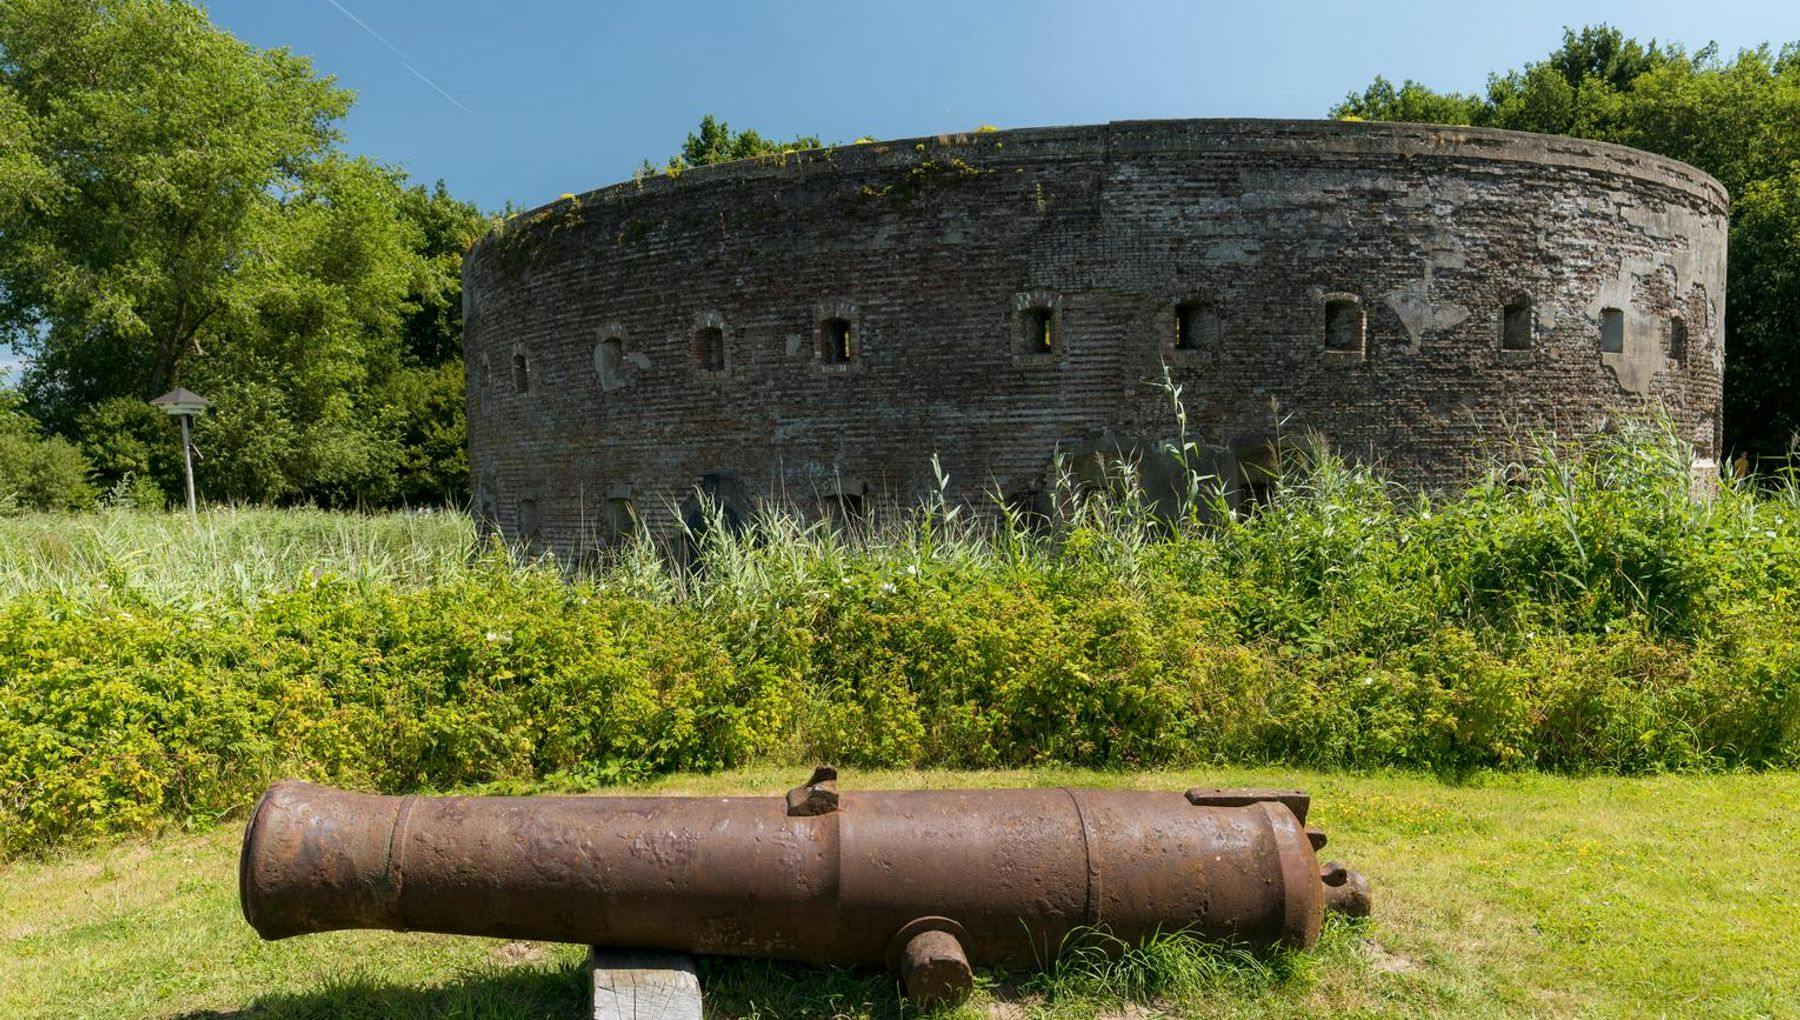 A cannon of fortress Uitermeer, part of the Defense line of Amsterdam.